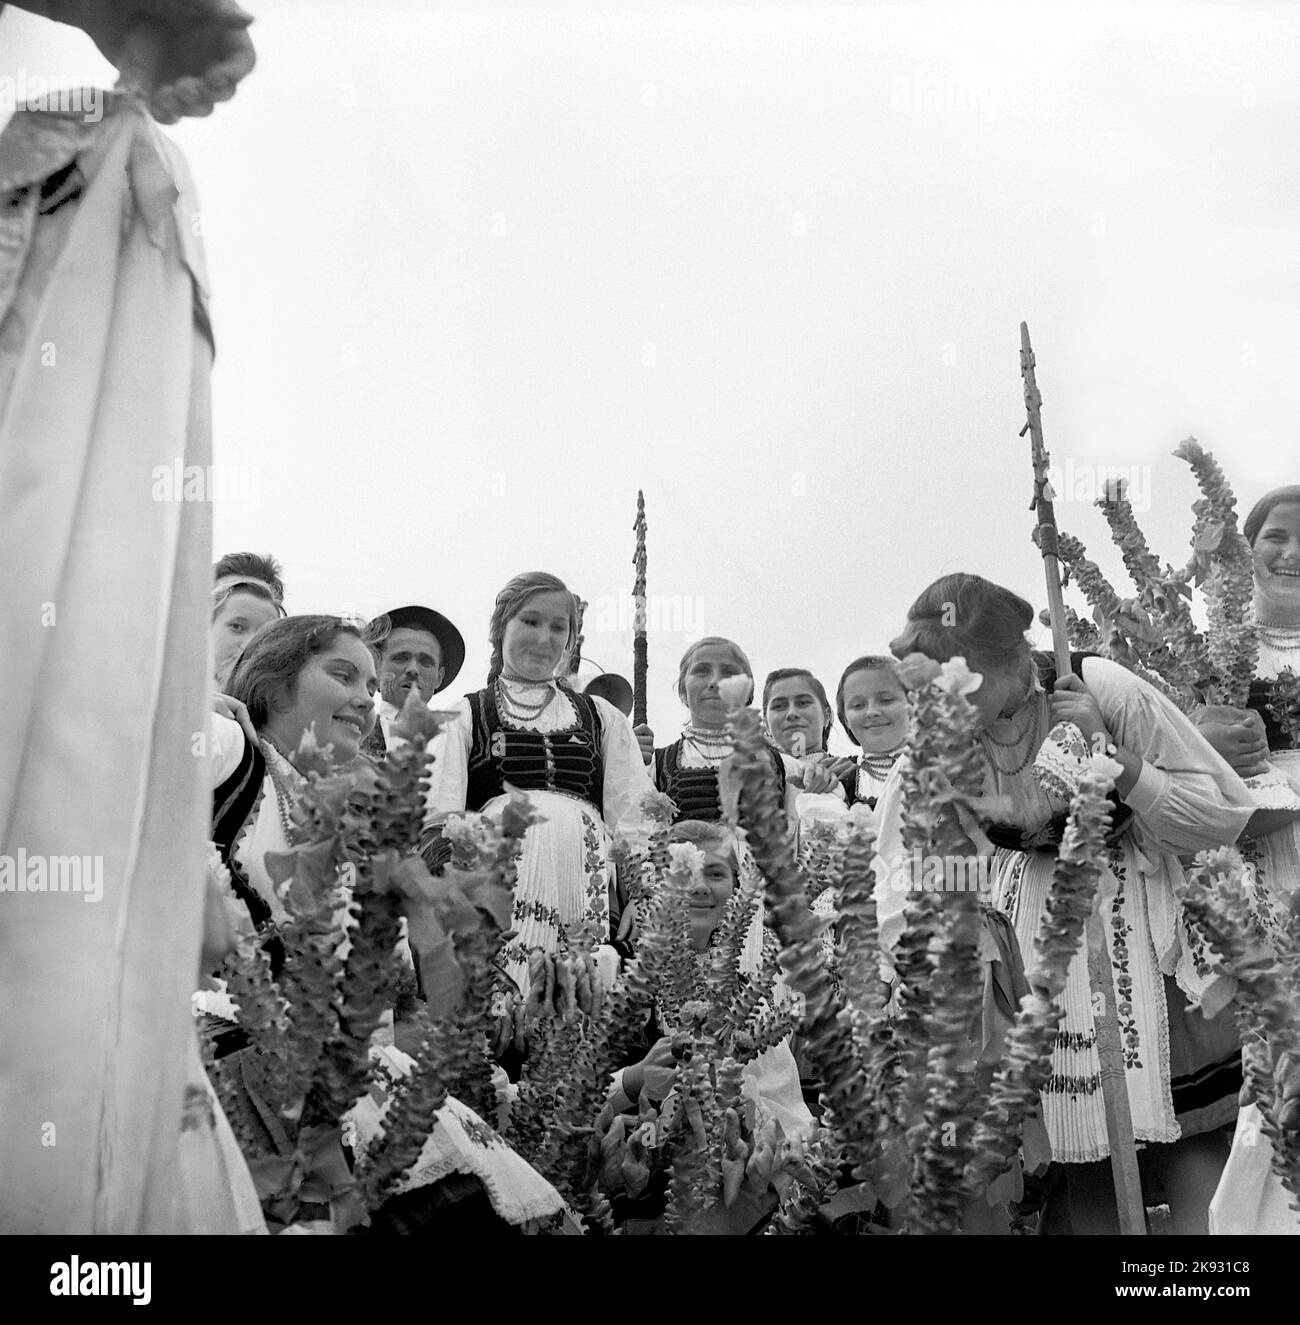 Covasna County, Romania, approx. 1974. Hungarian ethnics wearing their folk costumes celebrating 'Farsang' with the traditional doughnuts. Stock Photo